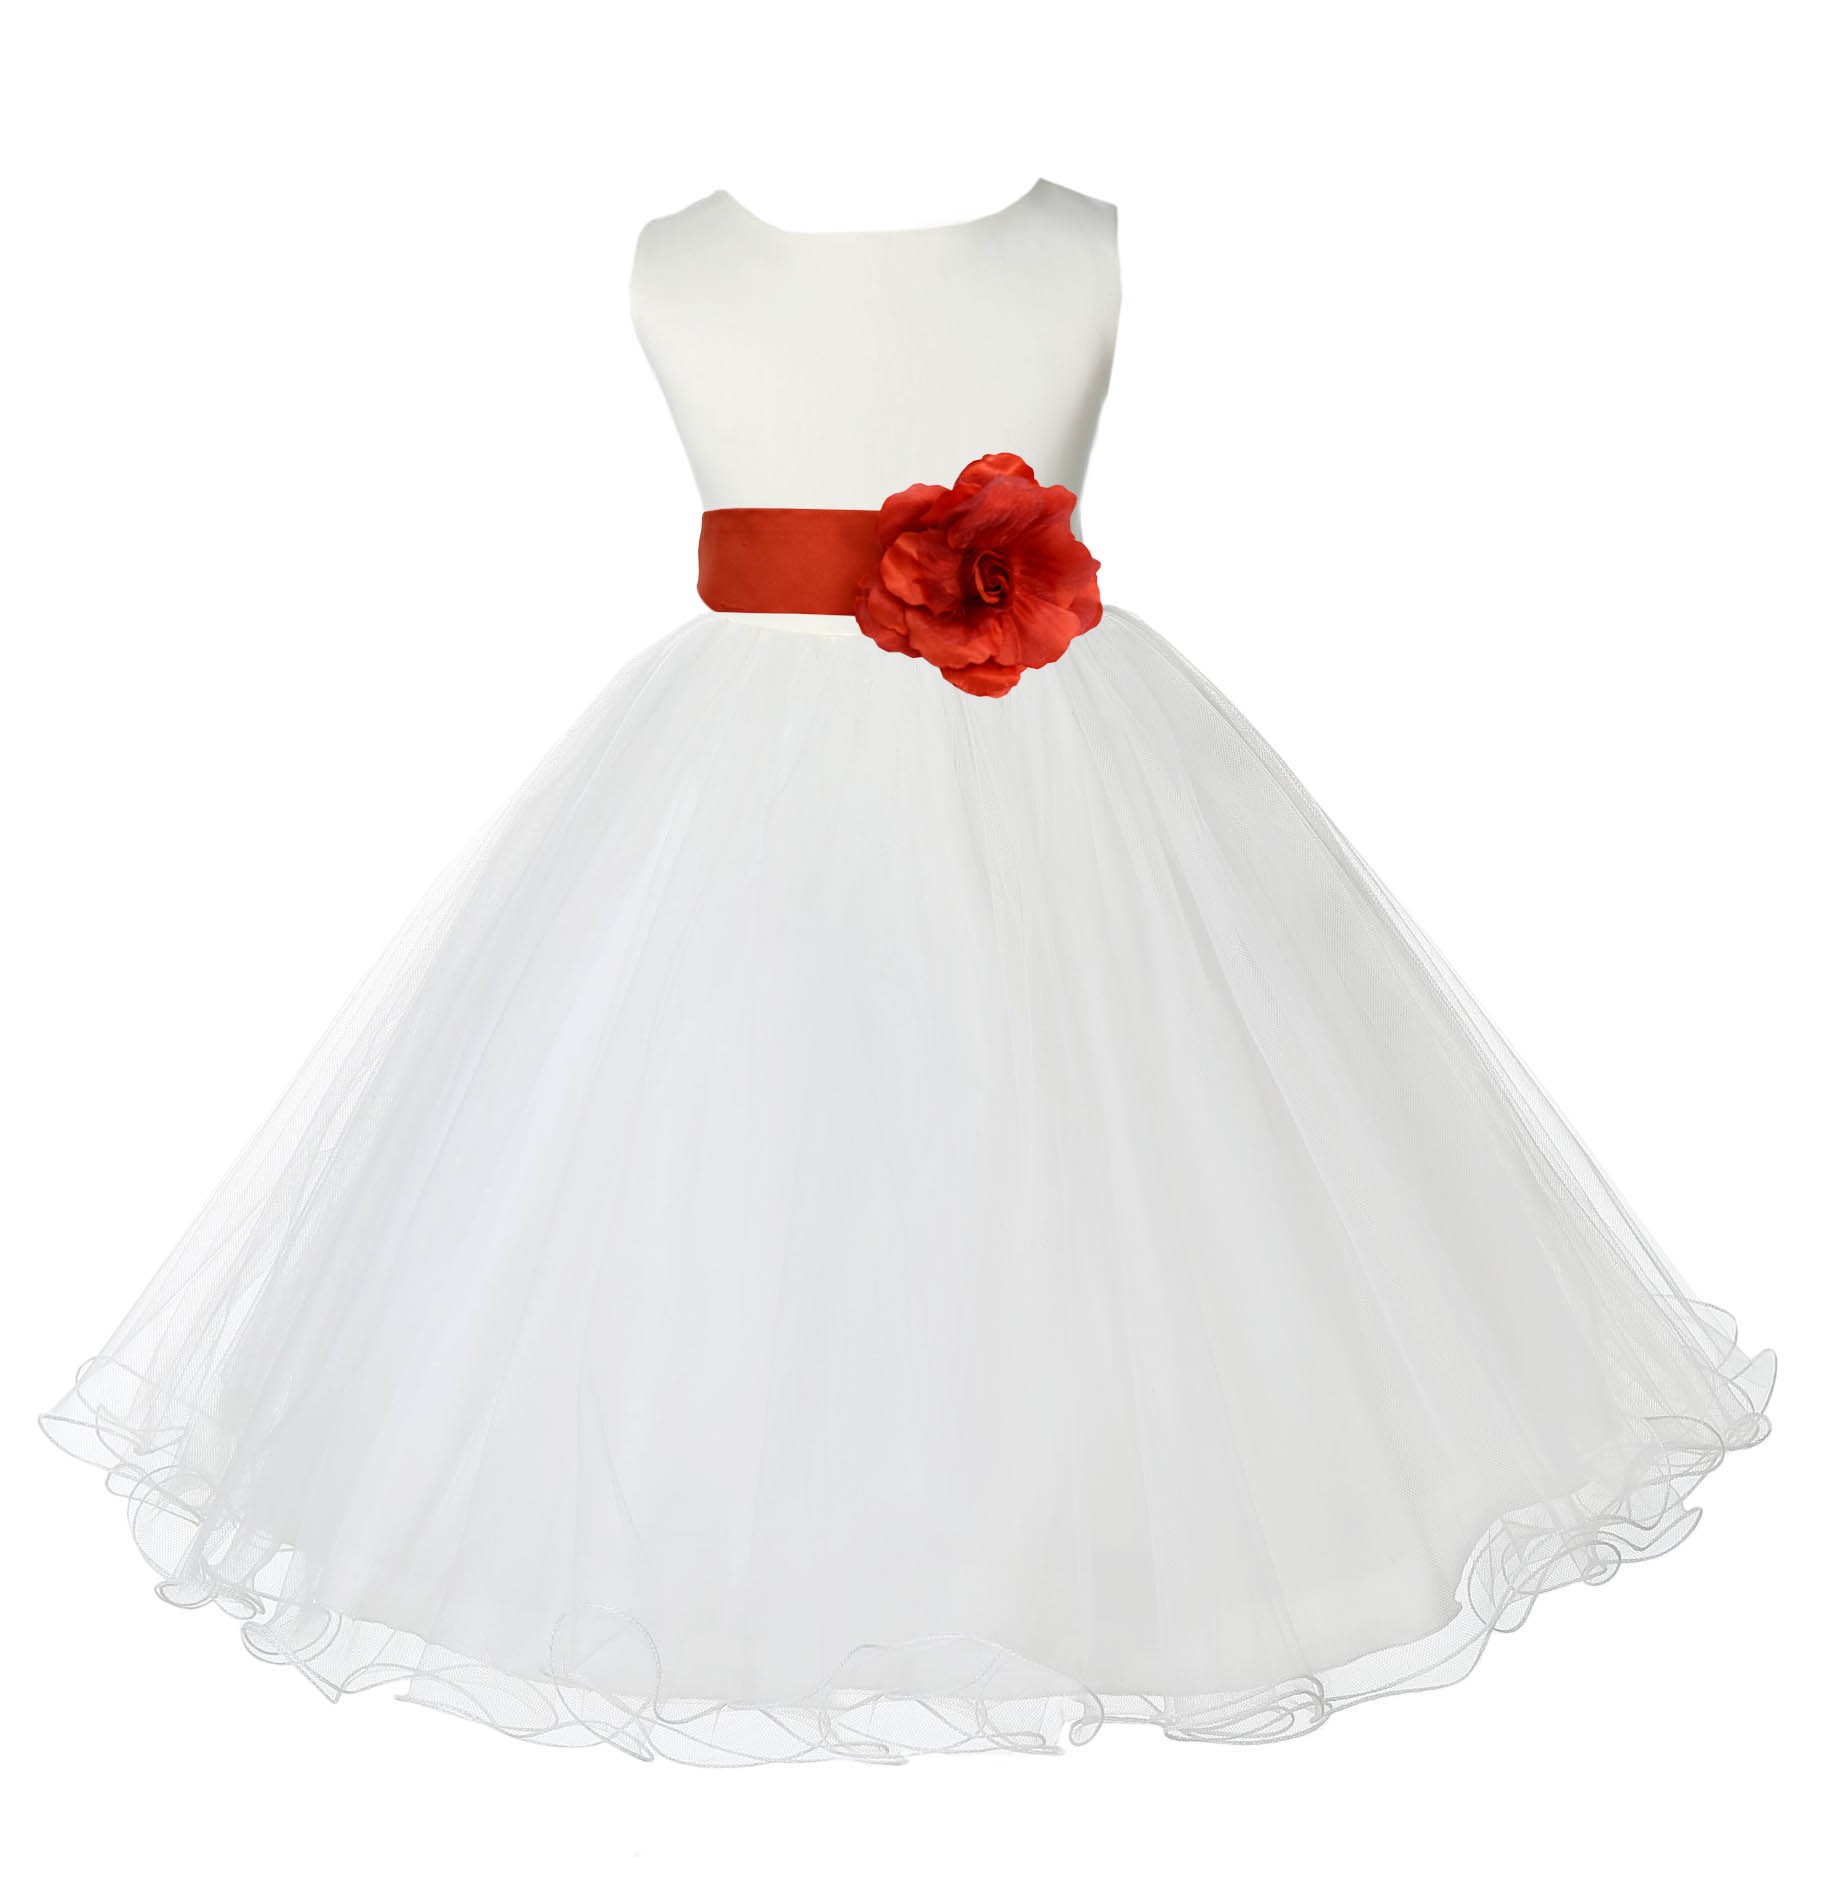 Ivory/Persimmon Tulle Rattail Edge Flower Girl Dress Pageant Recital 829S